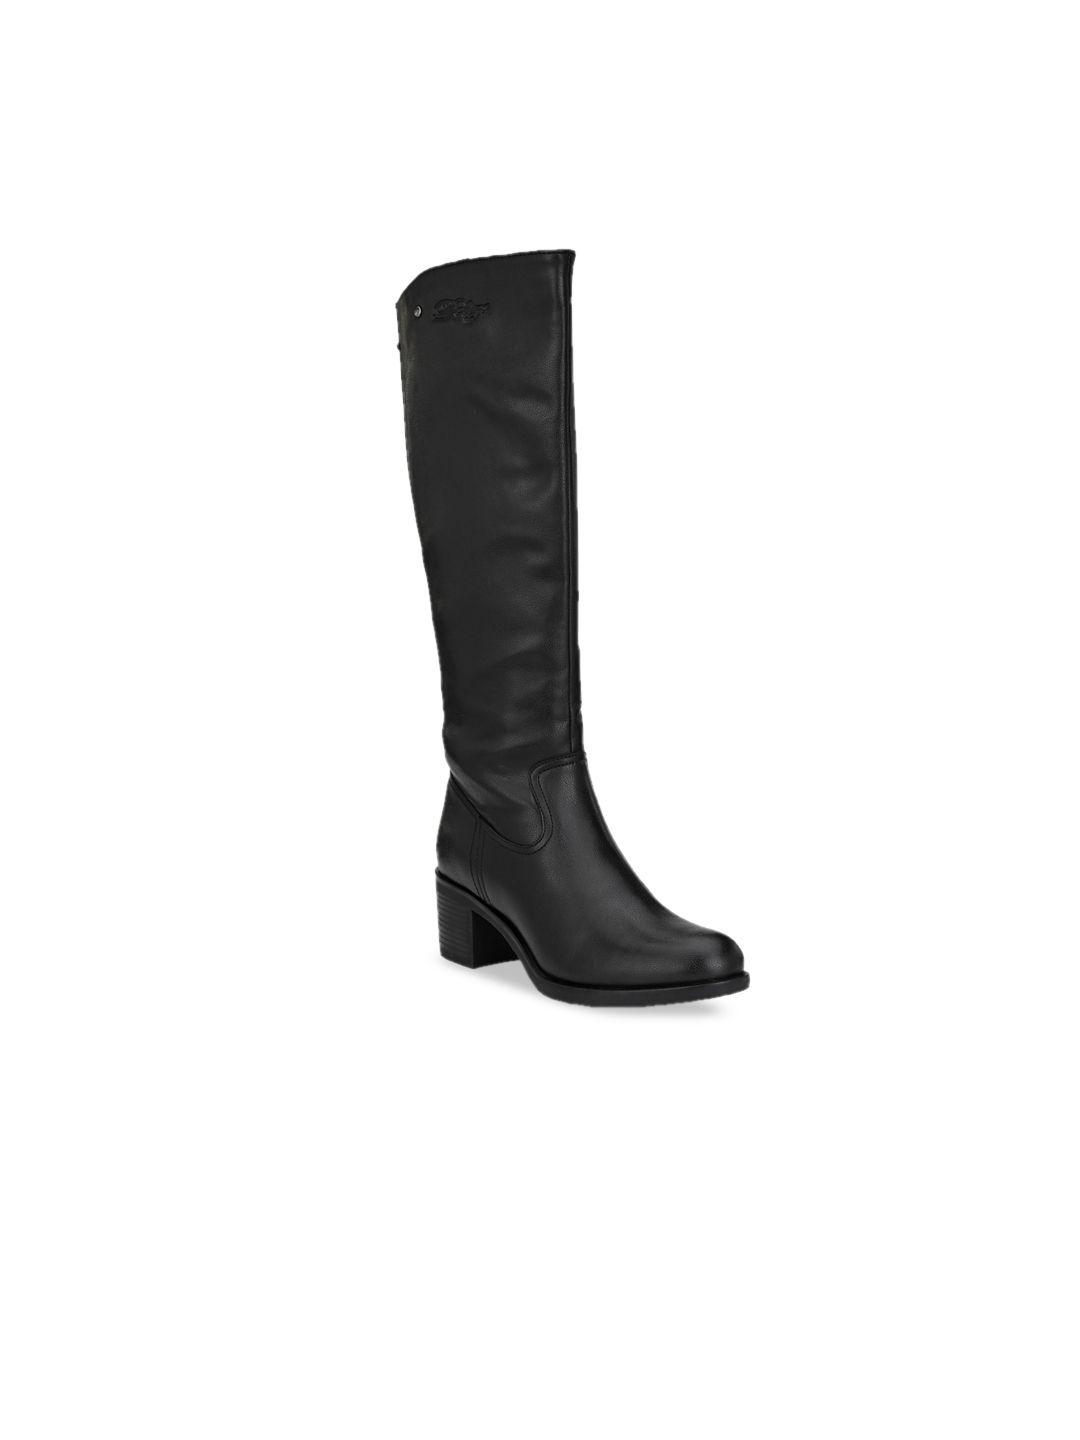 delize-women-black-solid-heeled-boots